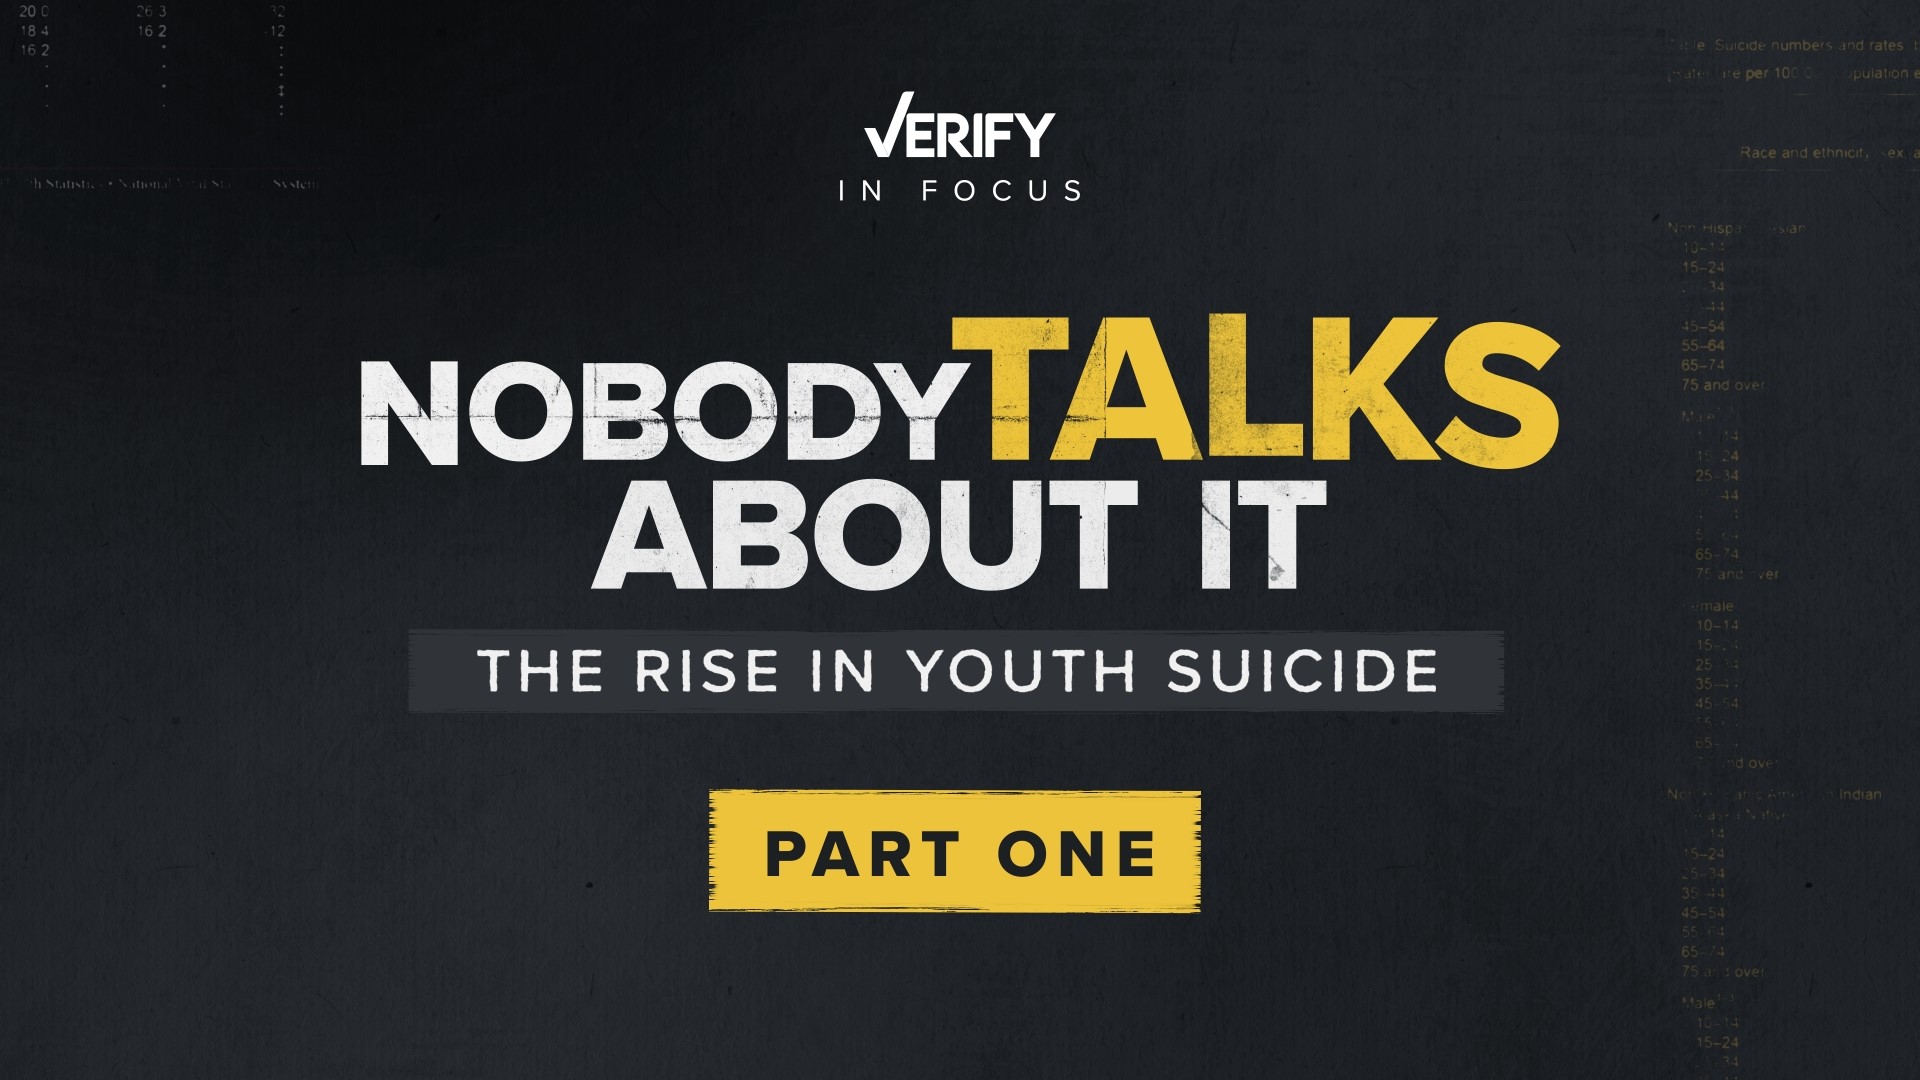 In part one, we talk to parents who lost their children to suicide and present evidence that the U.S. youth suicide rate has been on the rise for the last decade.